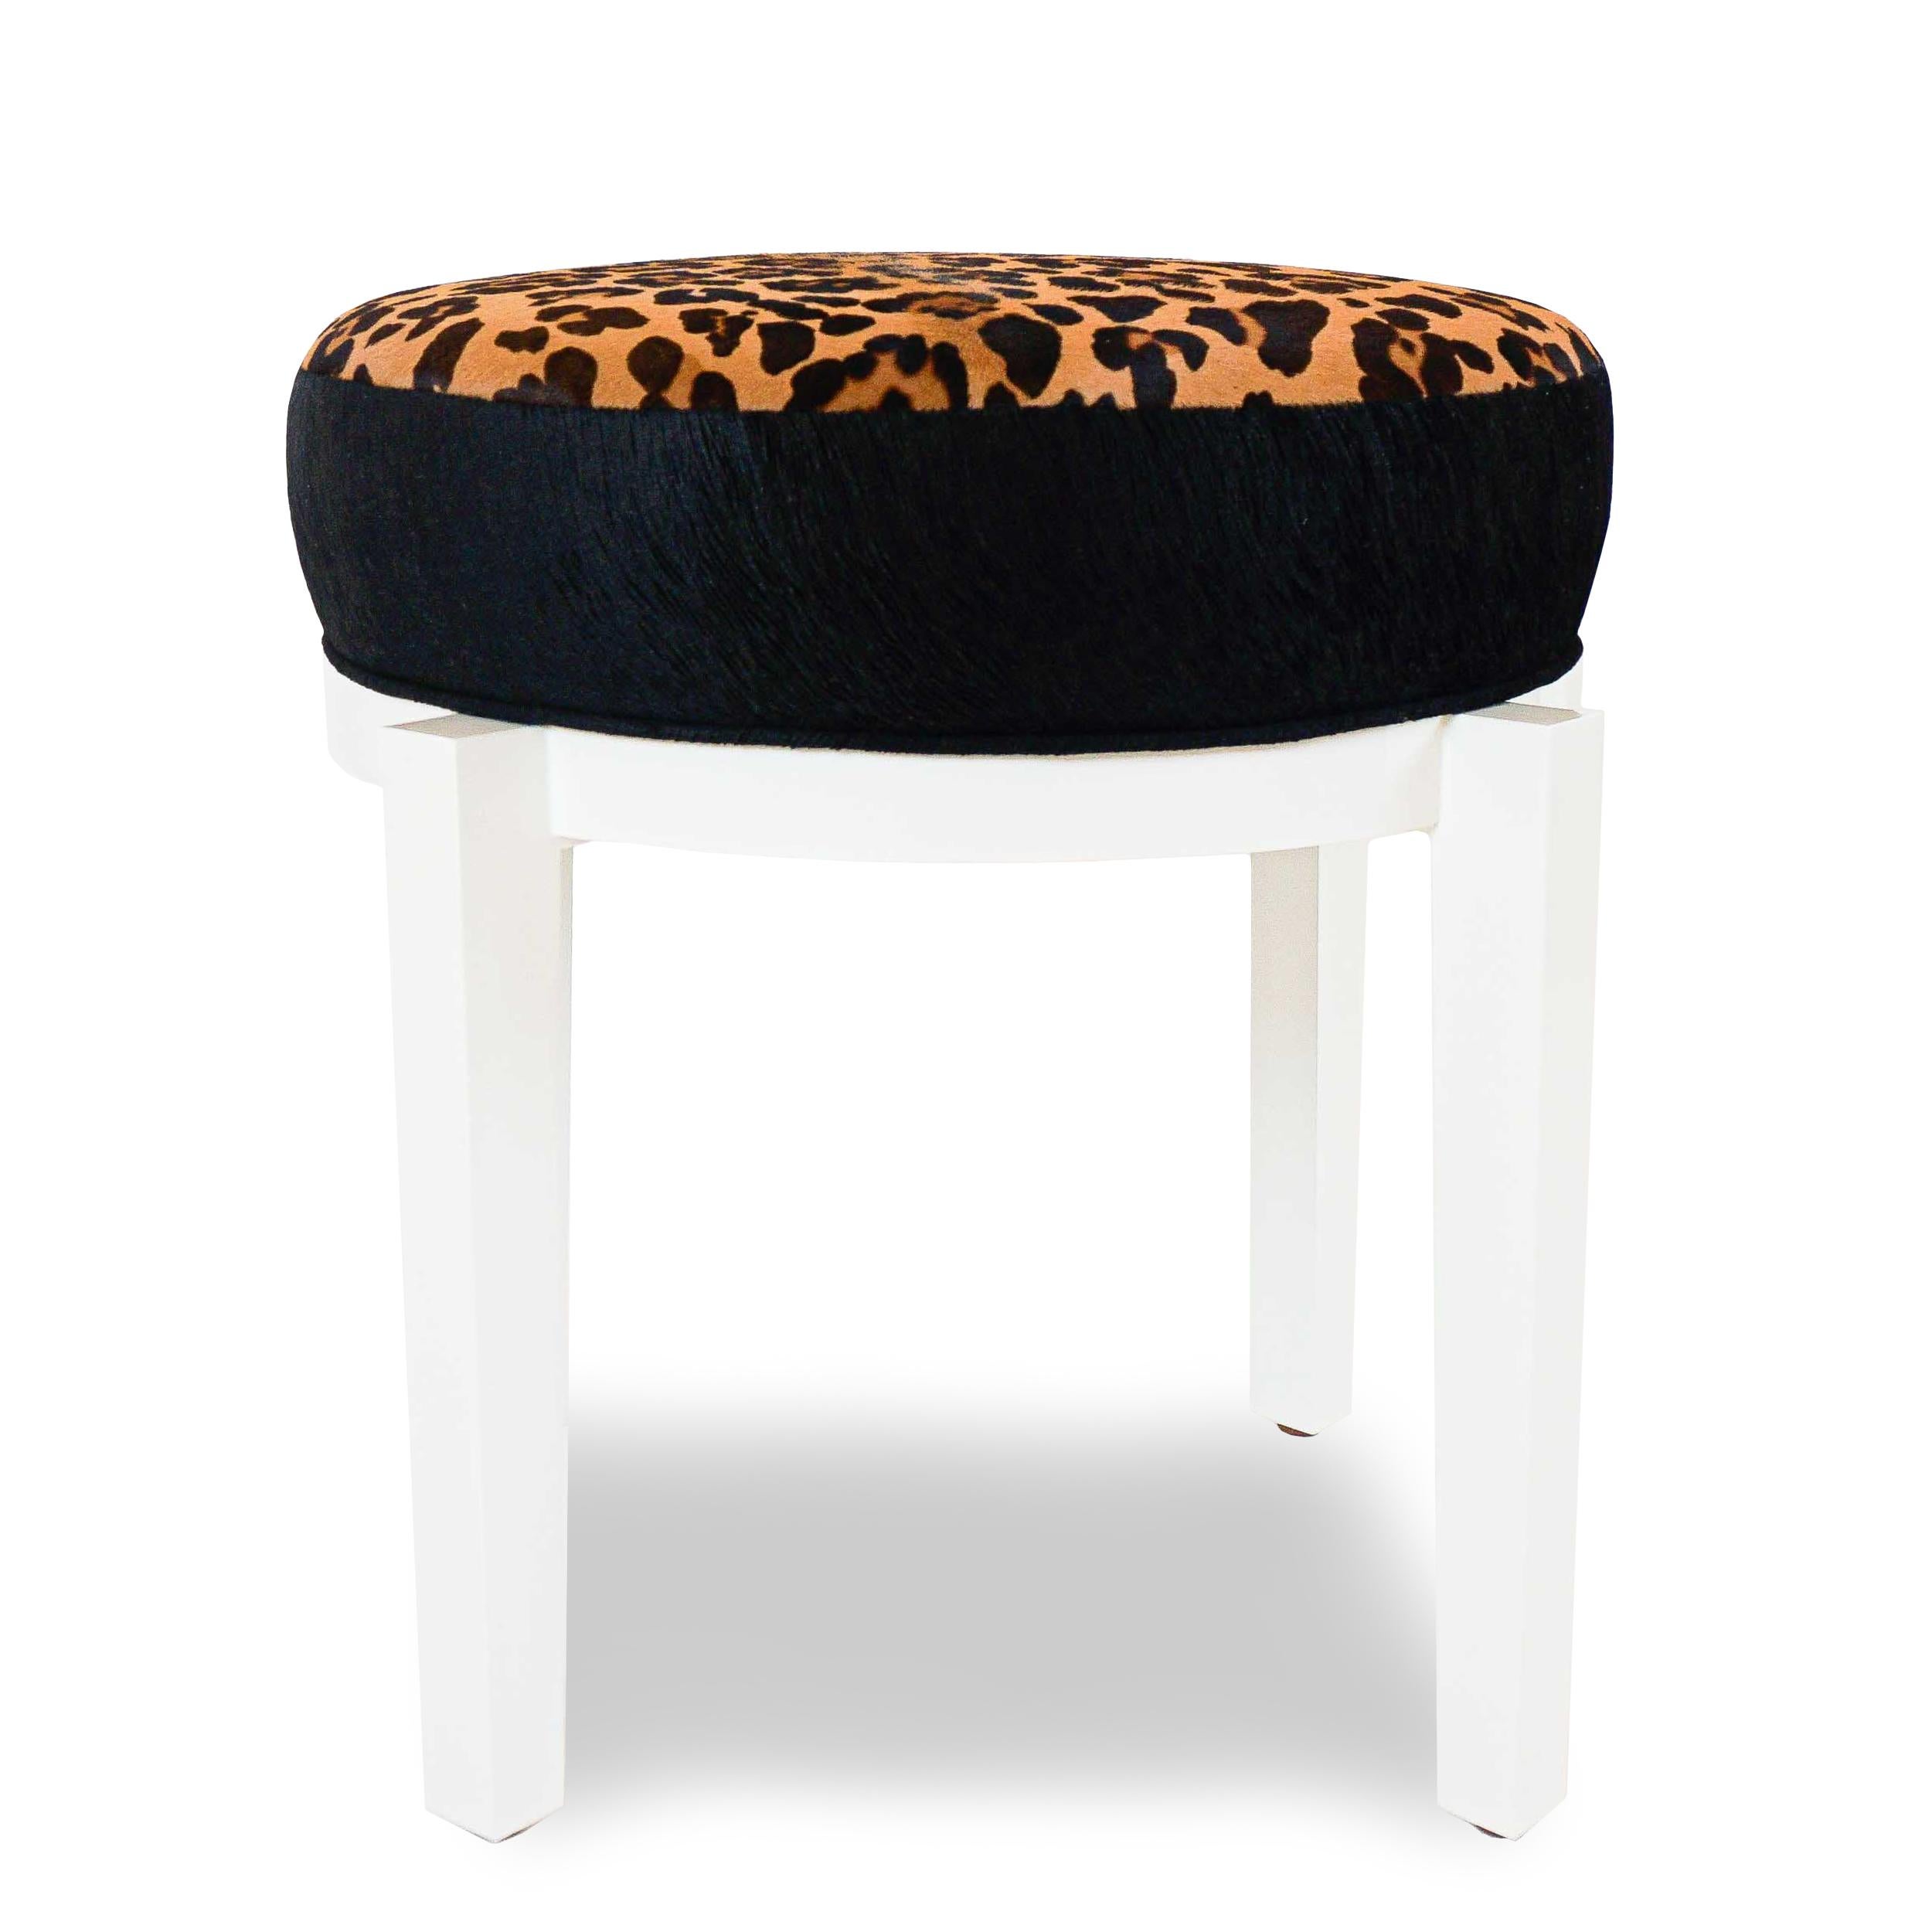 About this piece
Sold as a pair (or we can do custom orders of just 1), this ottoman set is solid hard maple frame lacquered high gloss white. The upholstery is a mixture of leopard printed calfskin and embossed black velvet. For occasional seating,